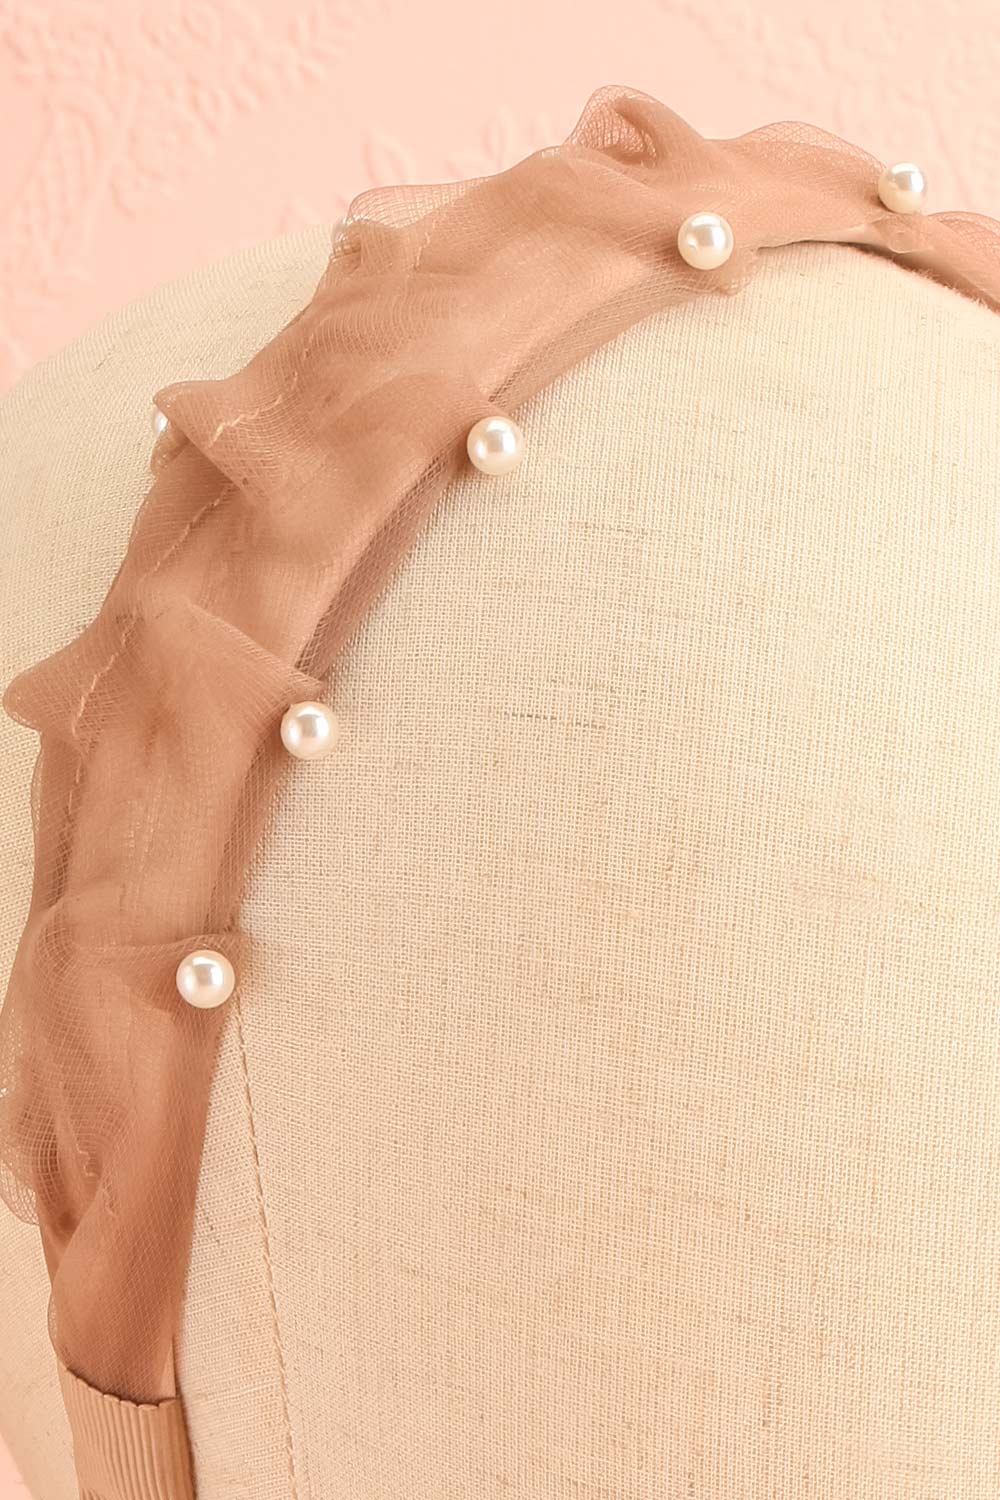 Bessy Taupe Headband w/ Tulle & Pearls | Boutique 1861 close-up